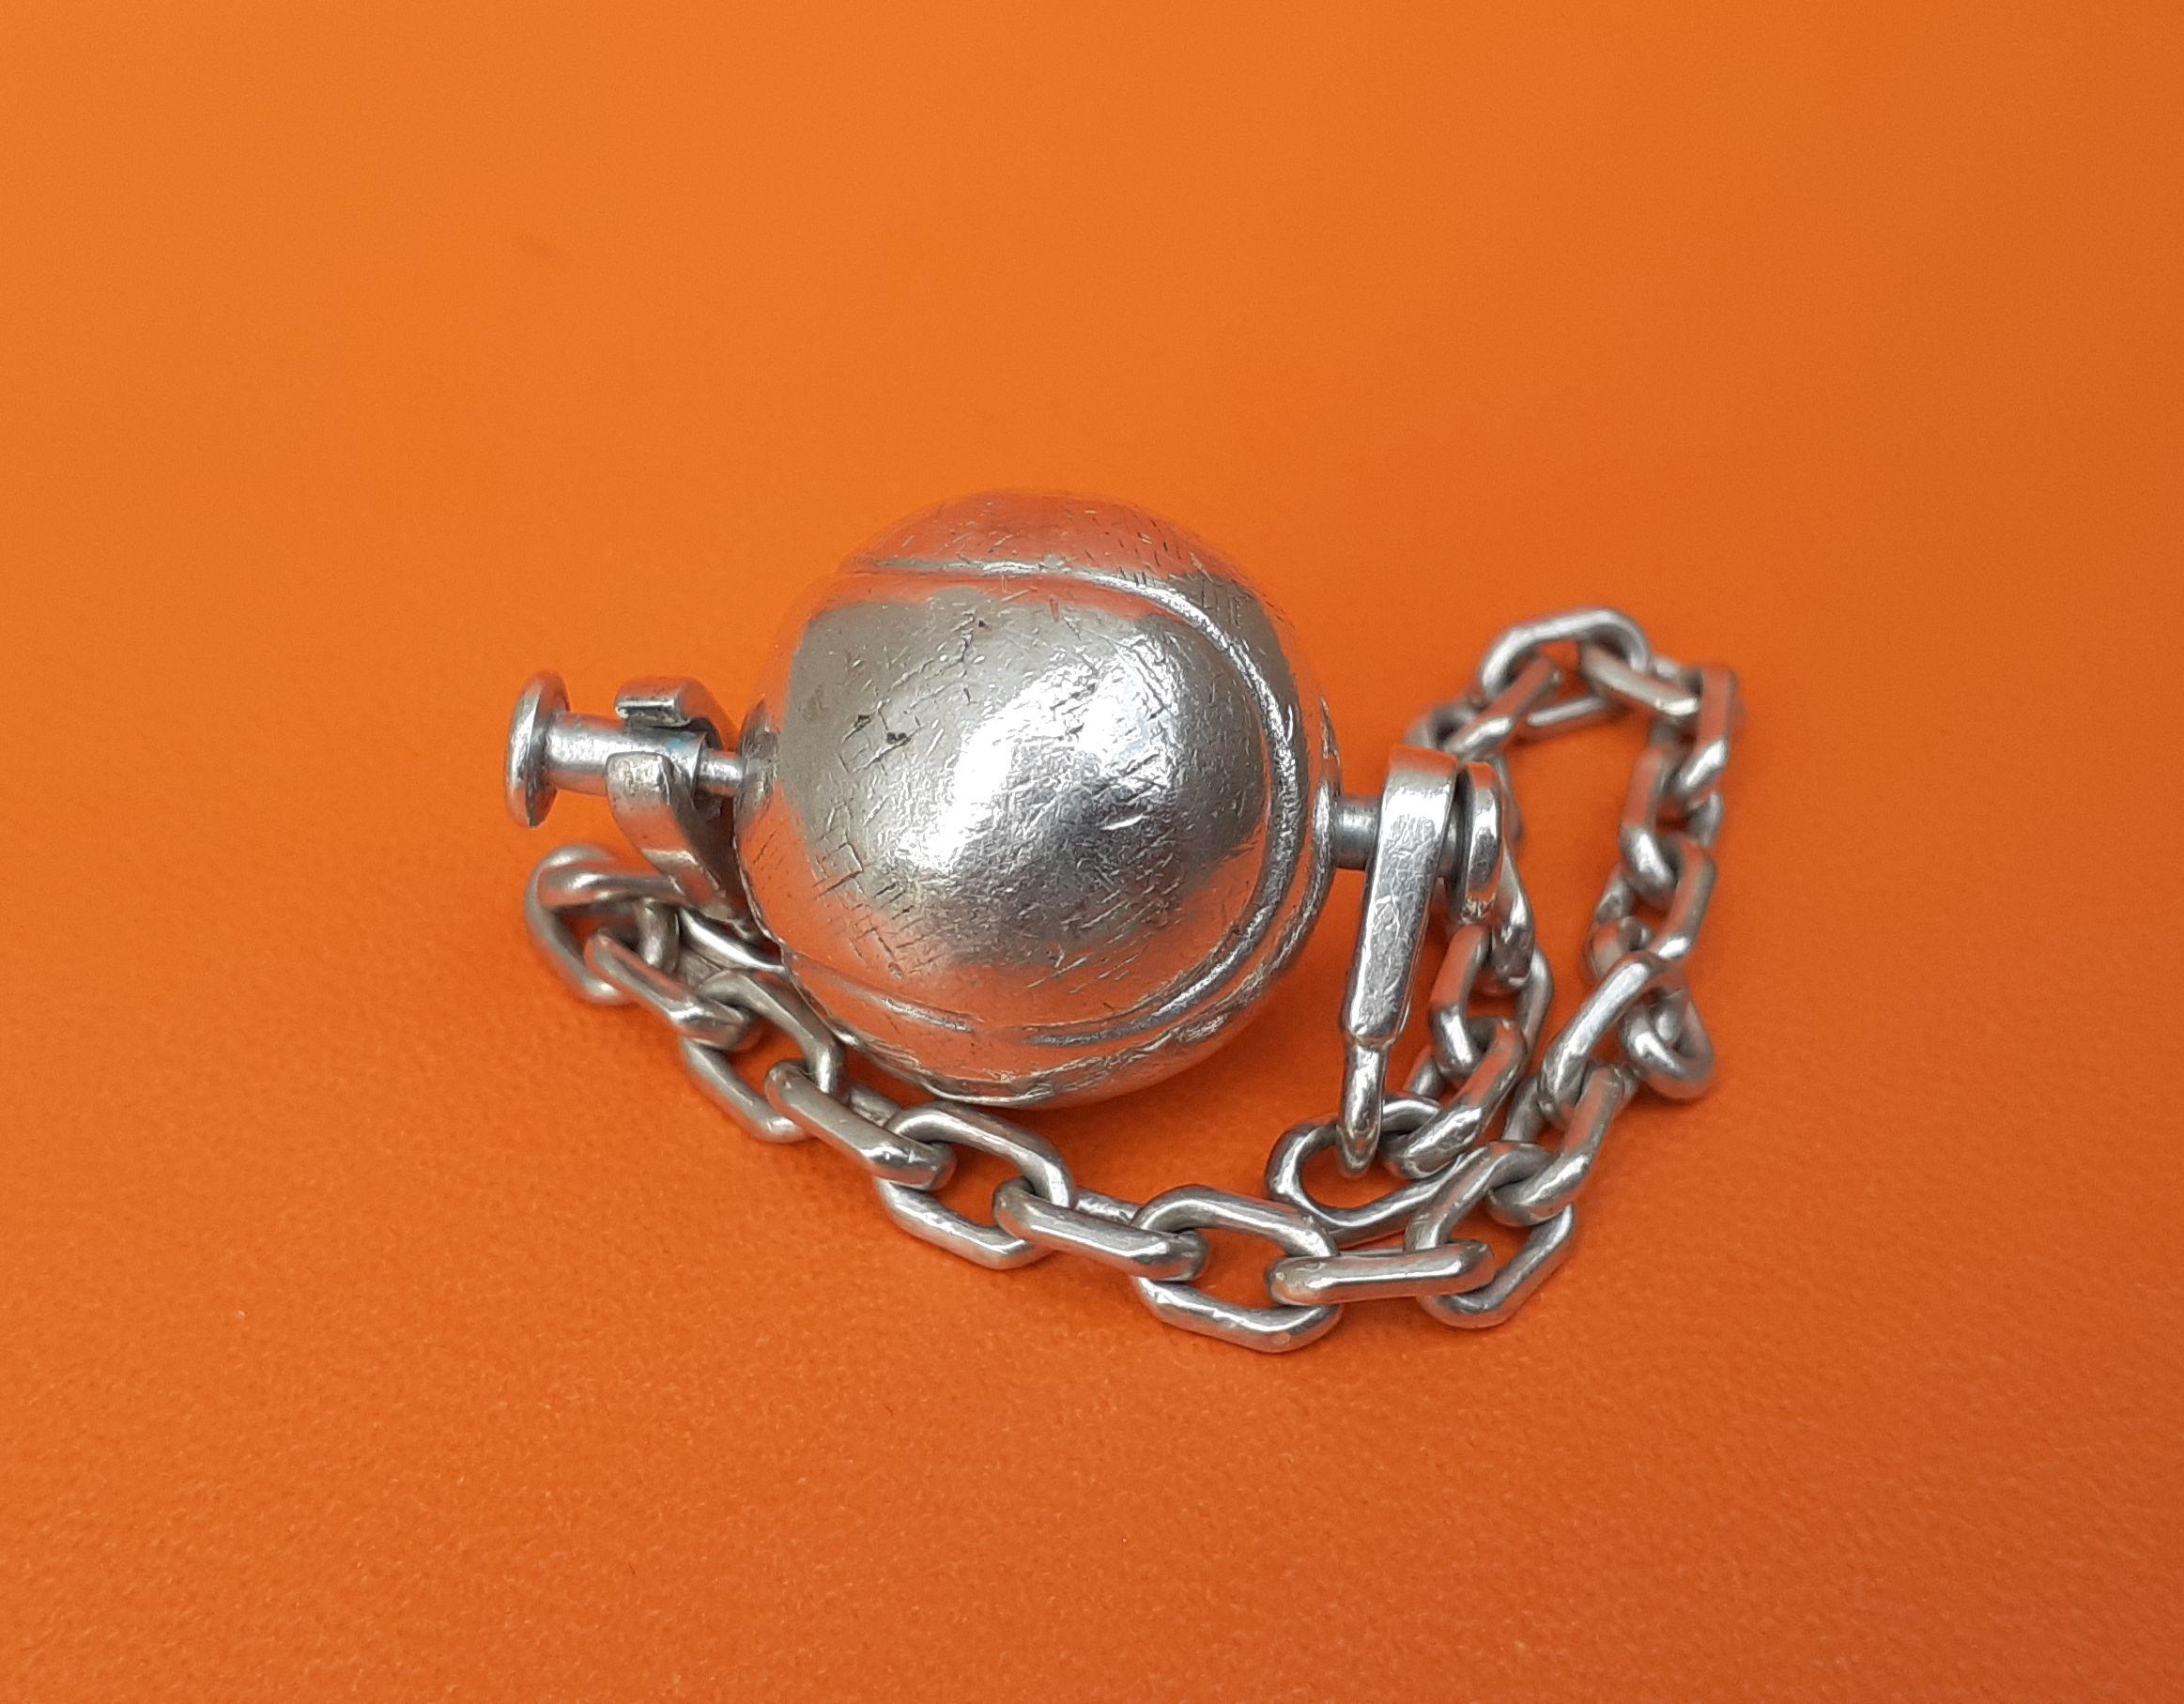 Exceptional Hermès Vintage Tennis Ball Key Ring Keychain in Silver Rare For Sale 4